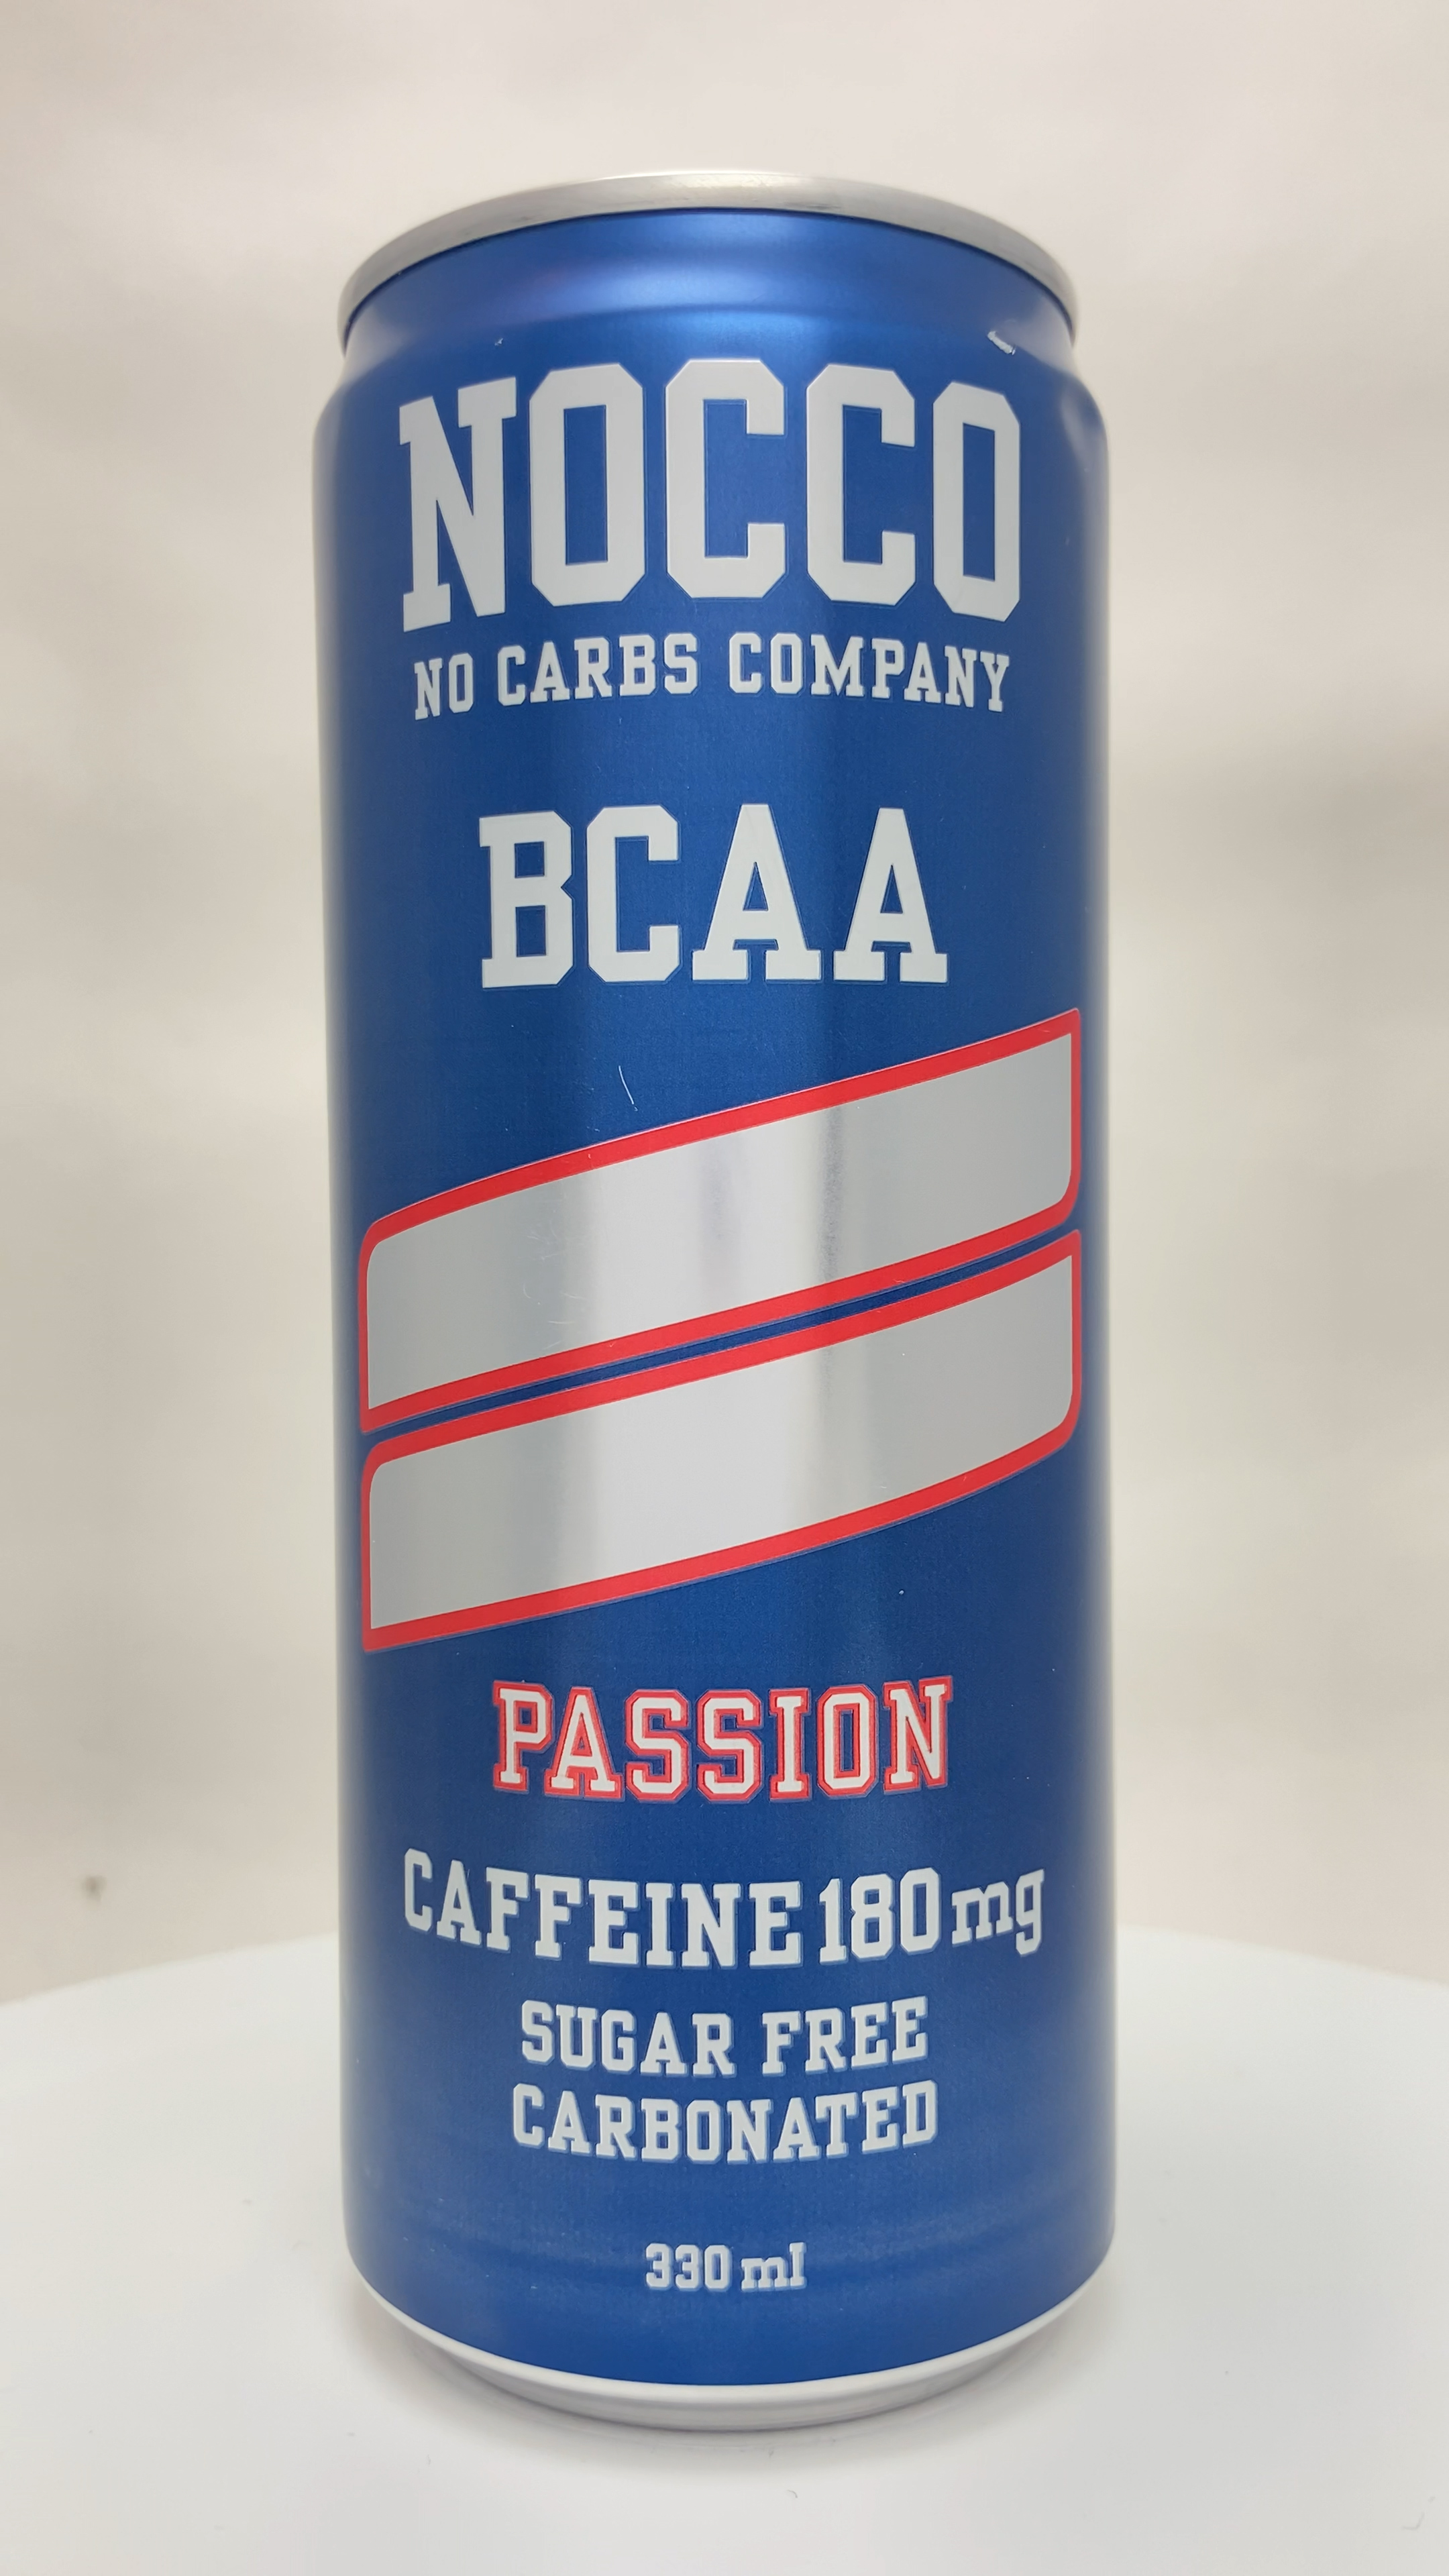 NOCCO BCAA Passion  Energy Drink Cans UK